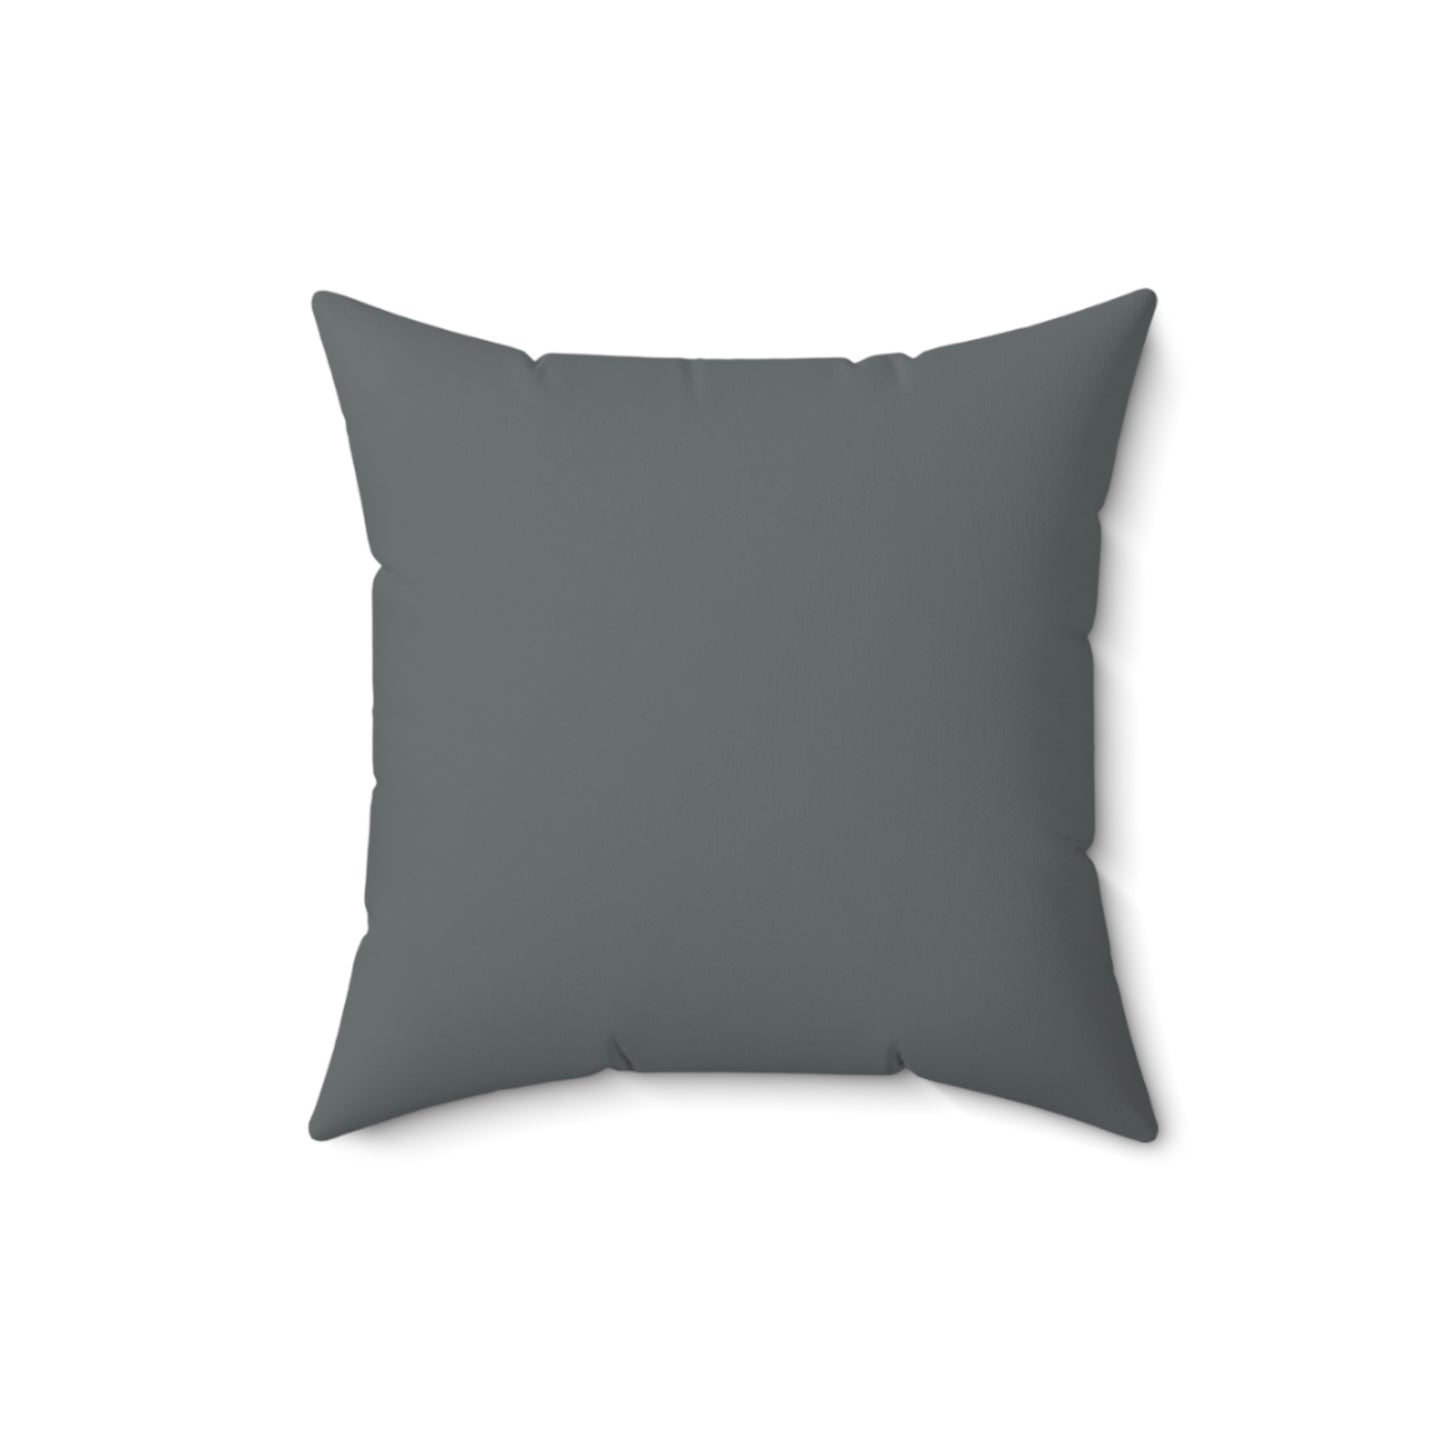 "Thinkin' About Dragons" Square Pillow